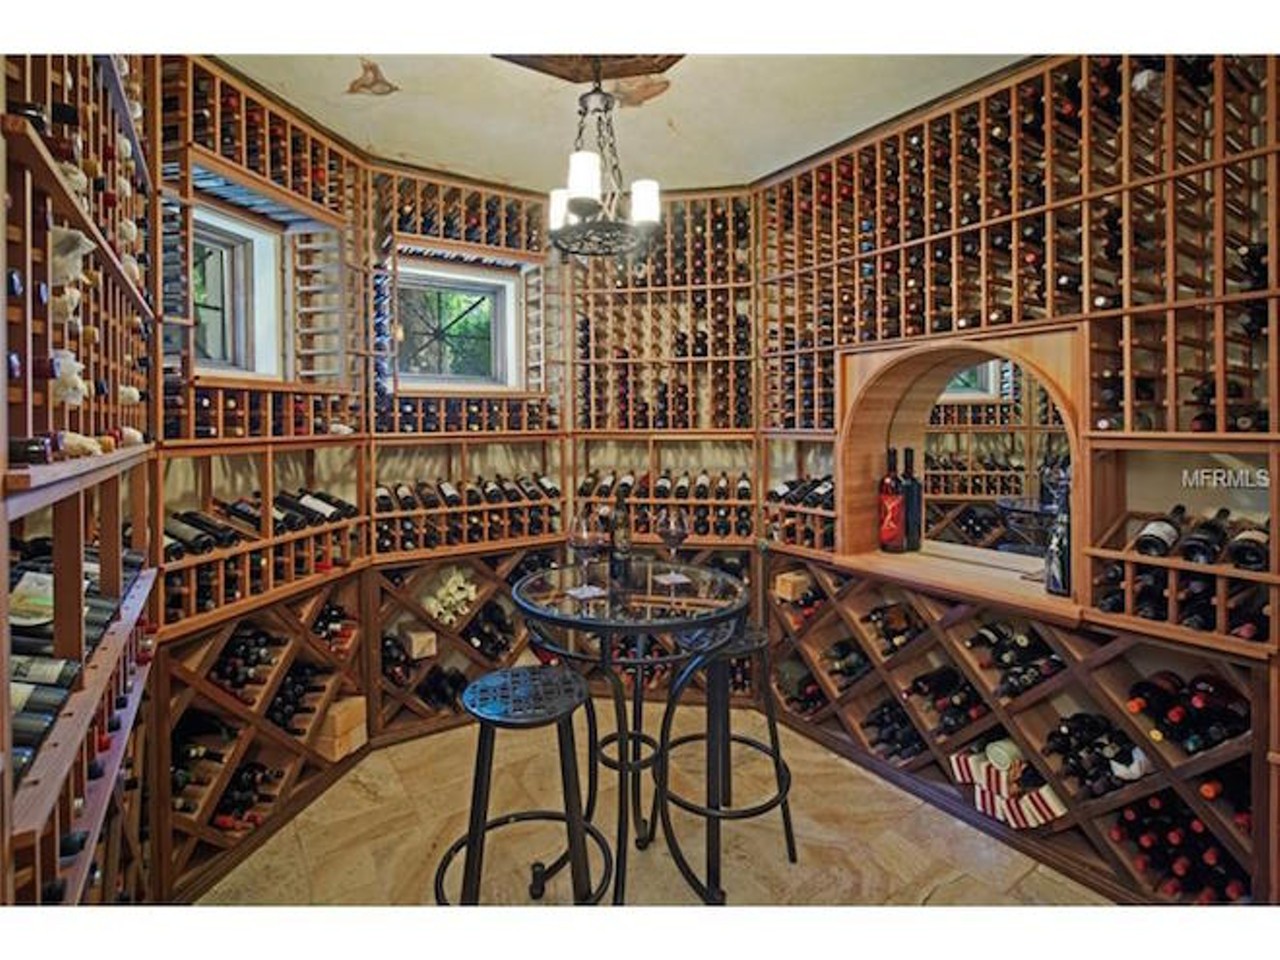 Pretty sure the wine in this room is worth more than most of our houses.